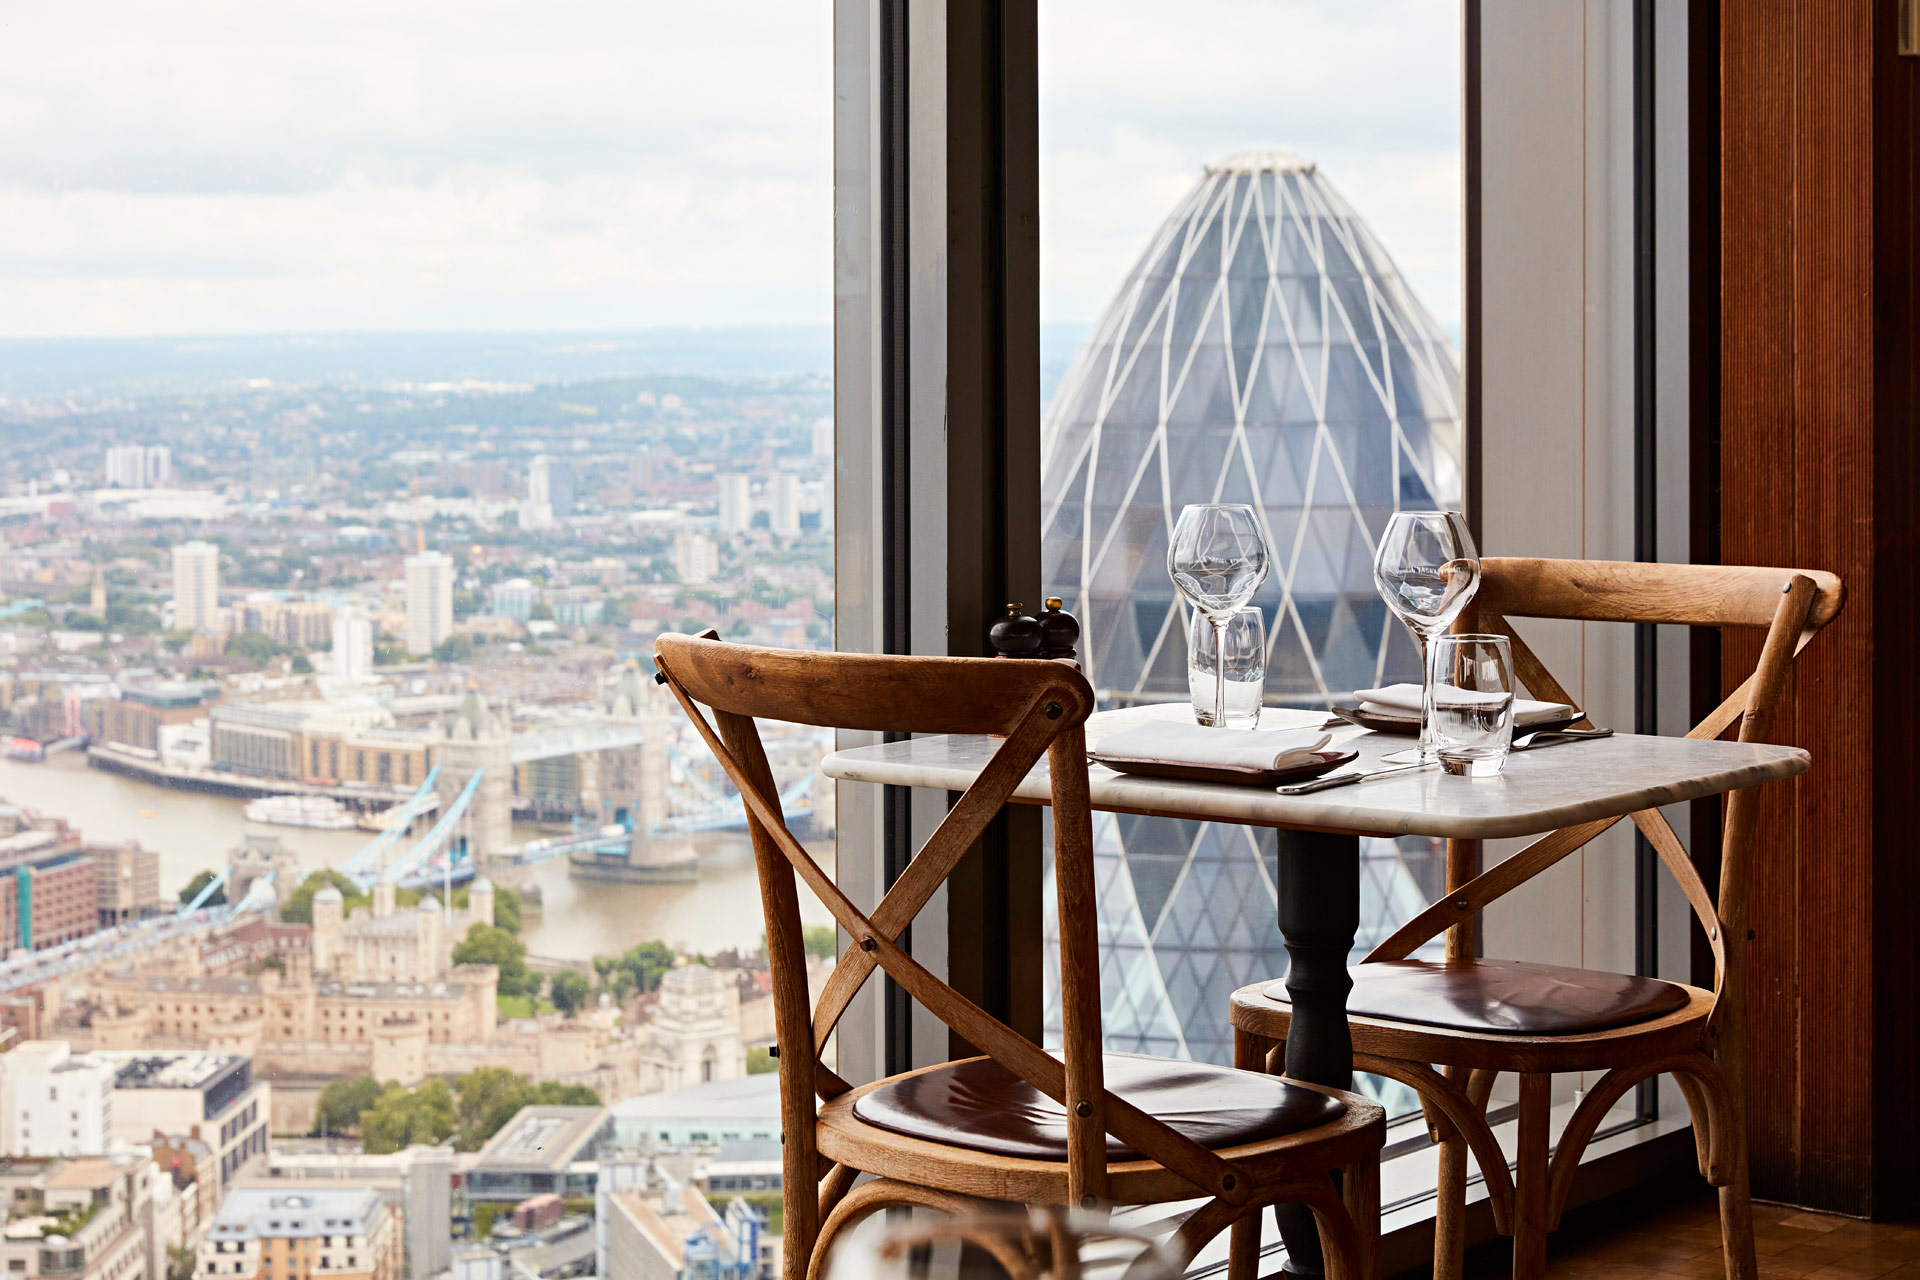 Review: A Decade On, Duck & Waffle Remains At the Top of its Game